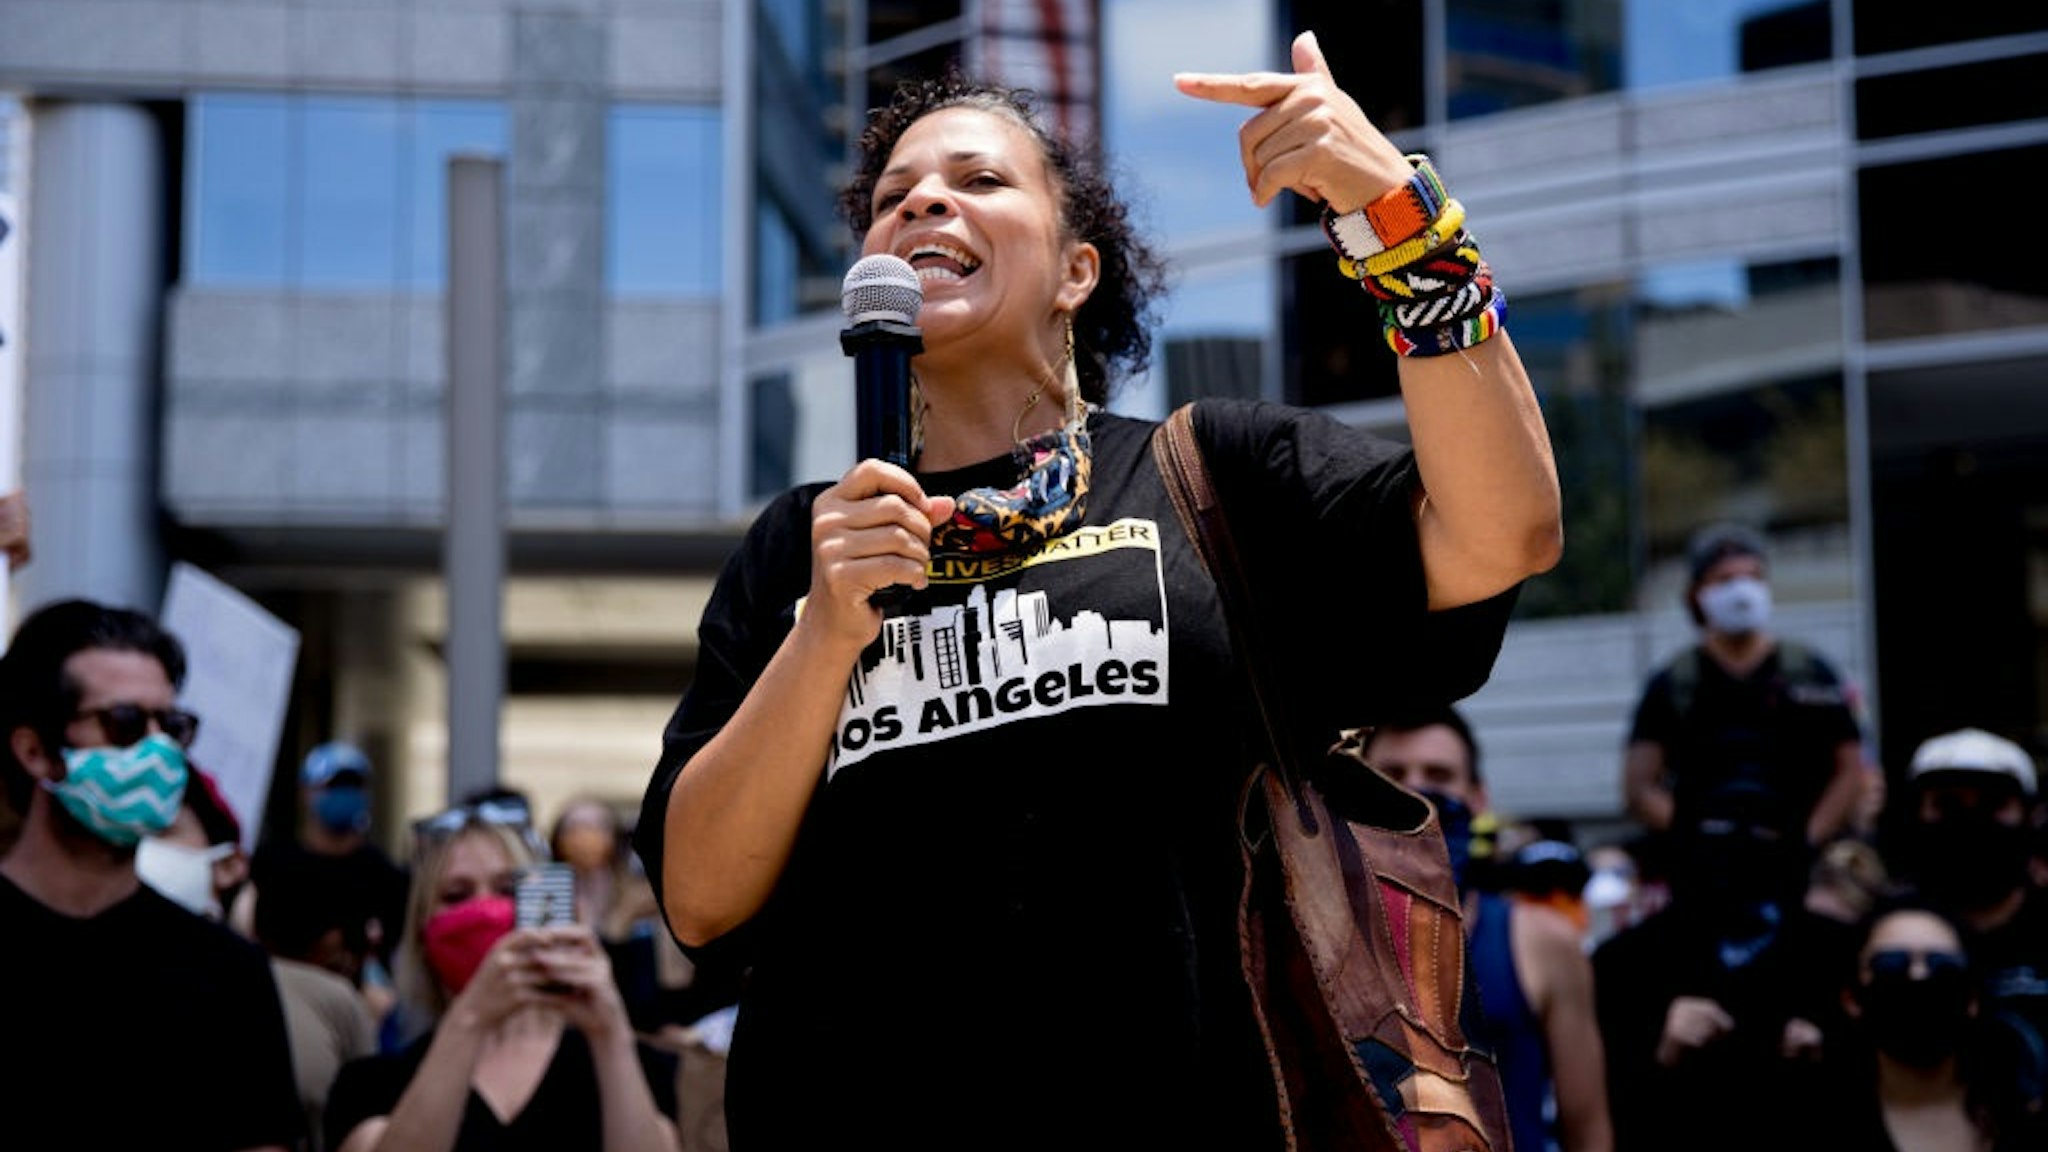 BEVERLY HILLS, CALIFORNIA - JUNE 06: Melina Abdullah participates in the Hollywood talent agencies march to support Black Lives Matter protests on June 06, 2020 in Beverly Hills, California.